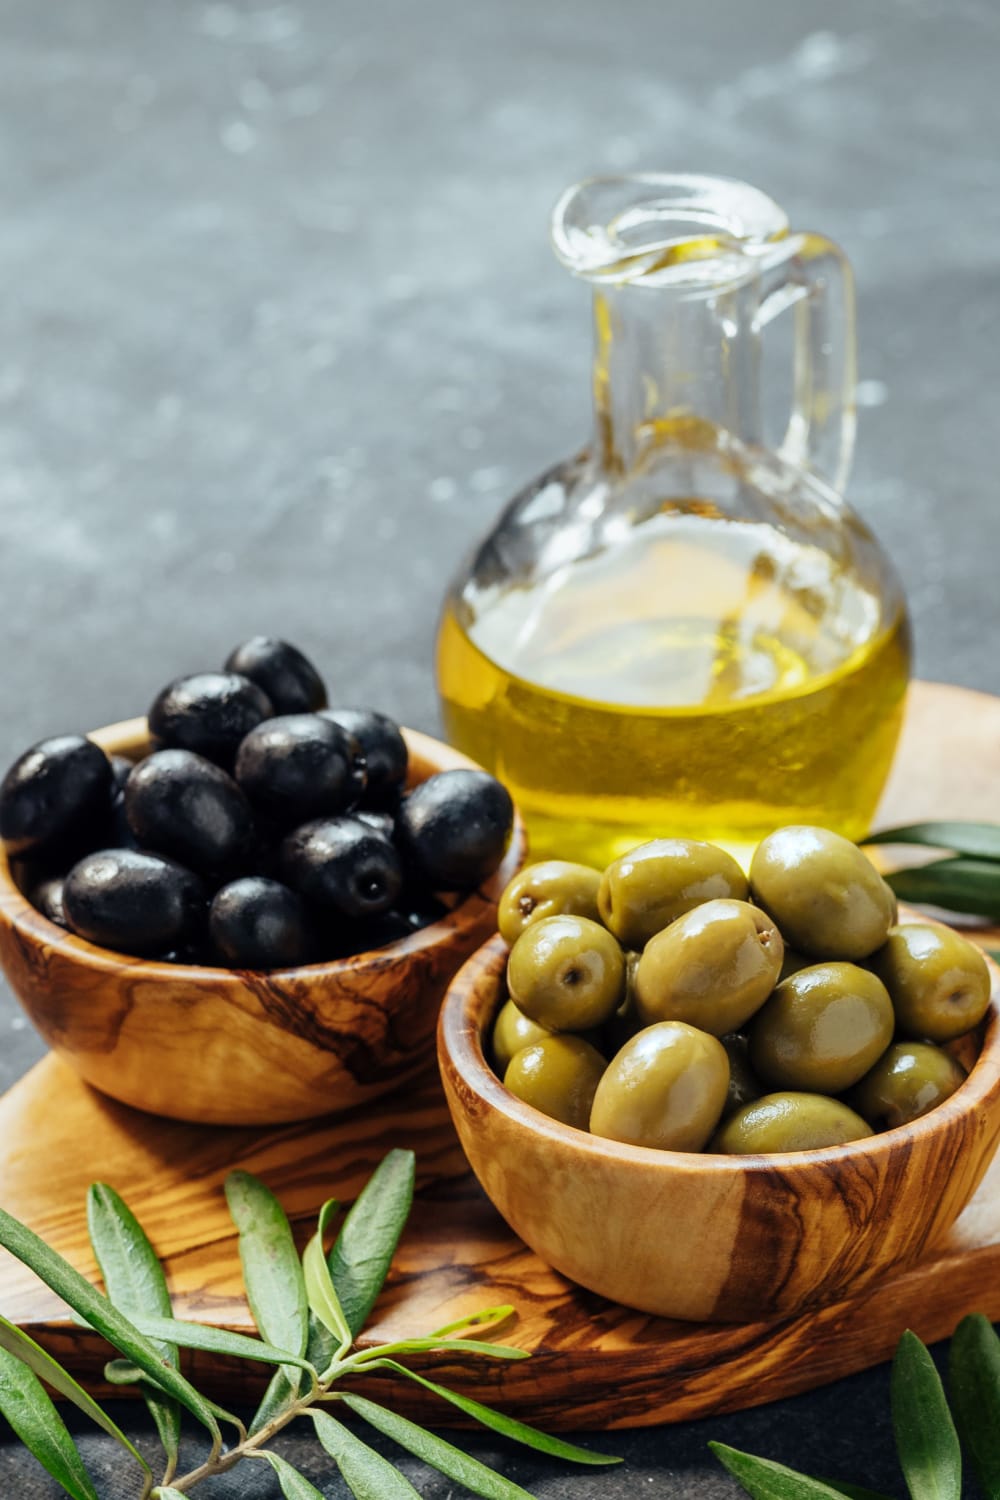 Bowl of Black and Green Olives and Olive Oil on a Bottle